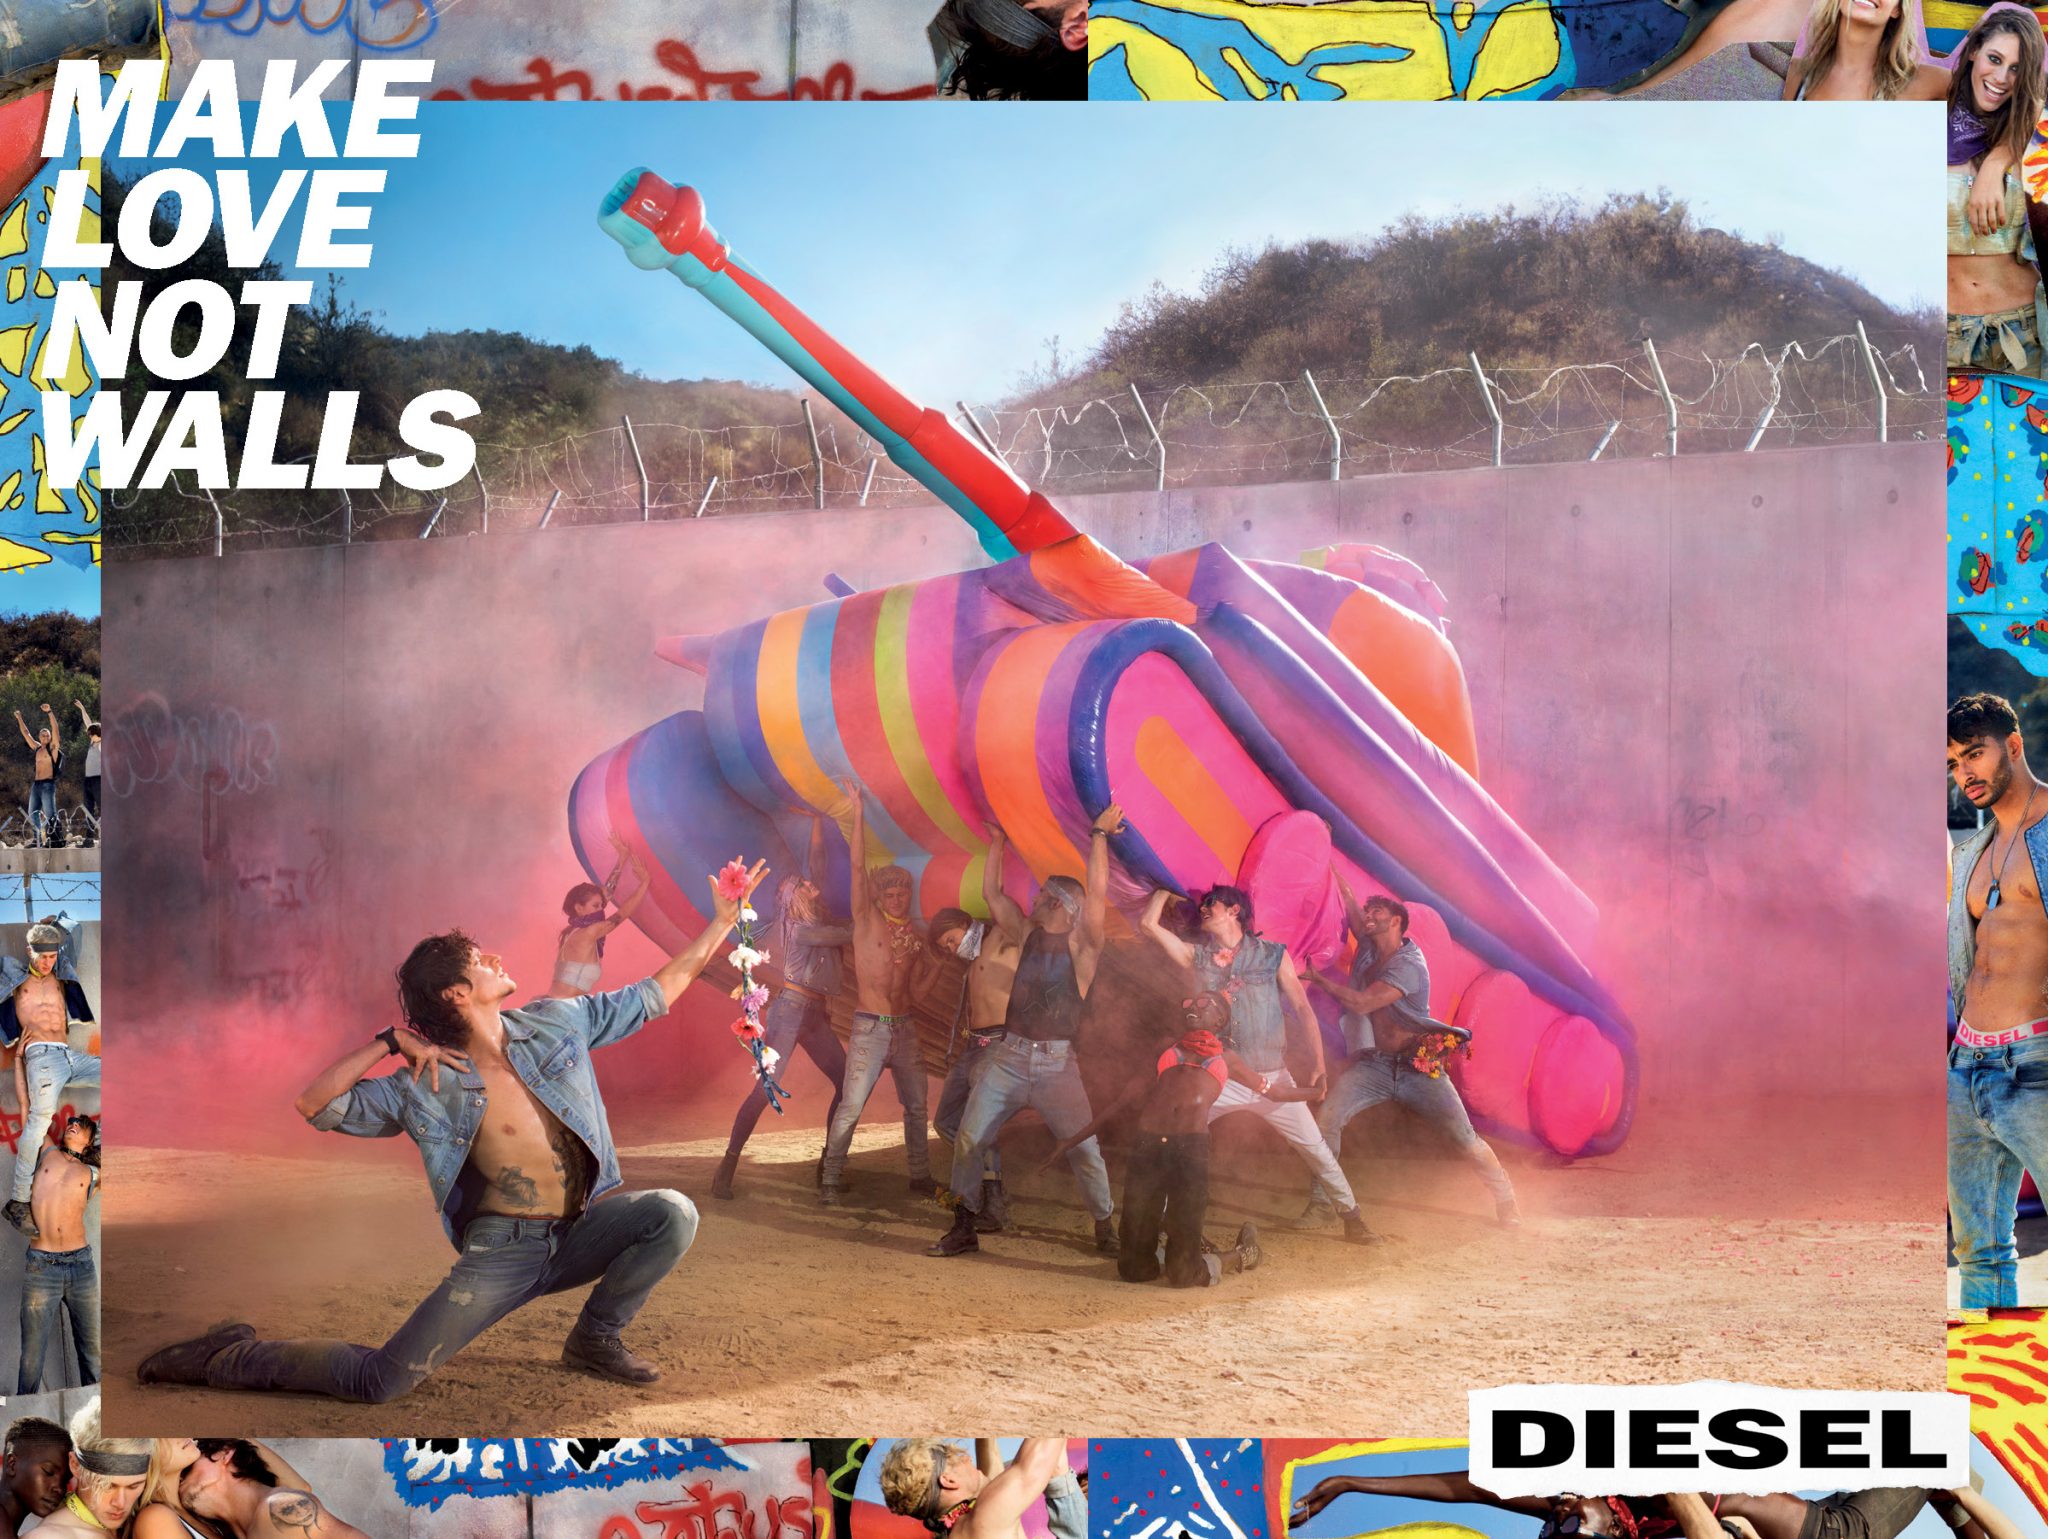 David LaChapelle | Diesel - Make love not walls | The award-winning multidisciplinary campaign launched with photography, a short film, and installations that traveled around the globe, putting forward a timely message that pays tribute to inclusion, love, diversity, and fraternity.
| 12